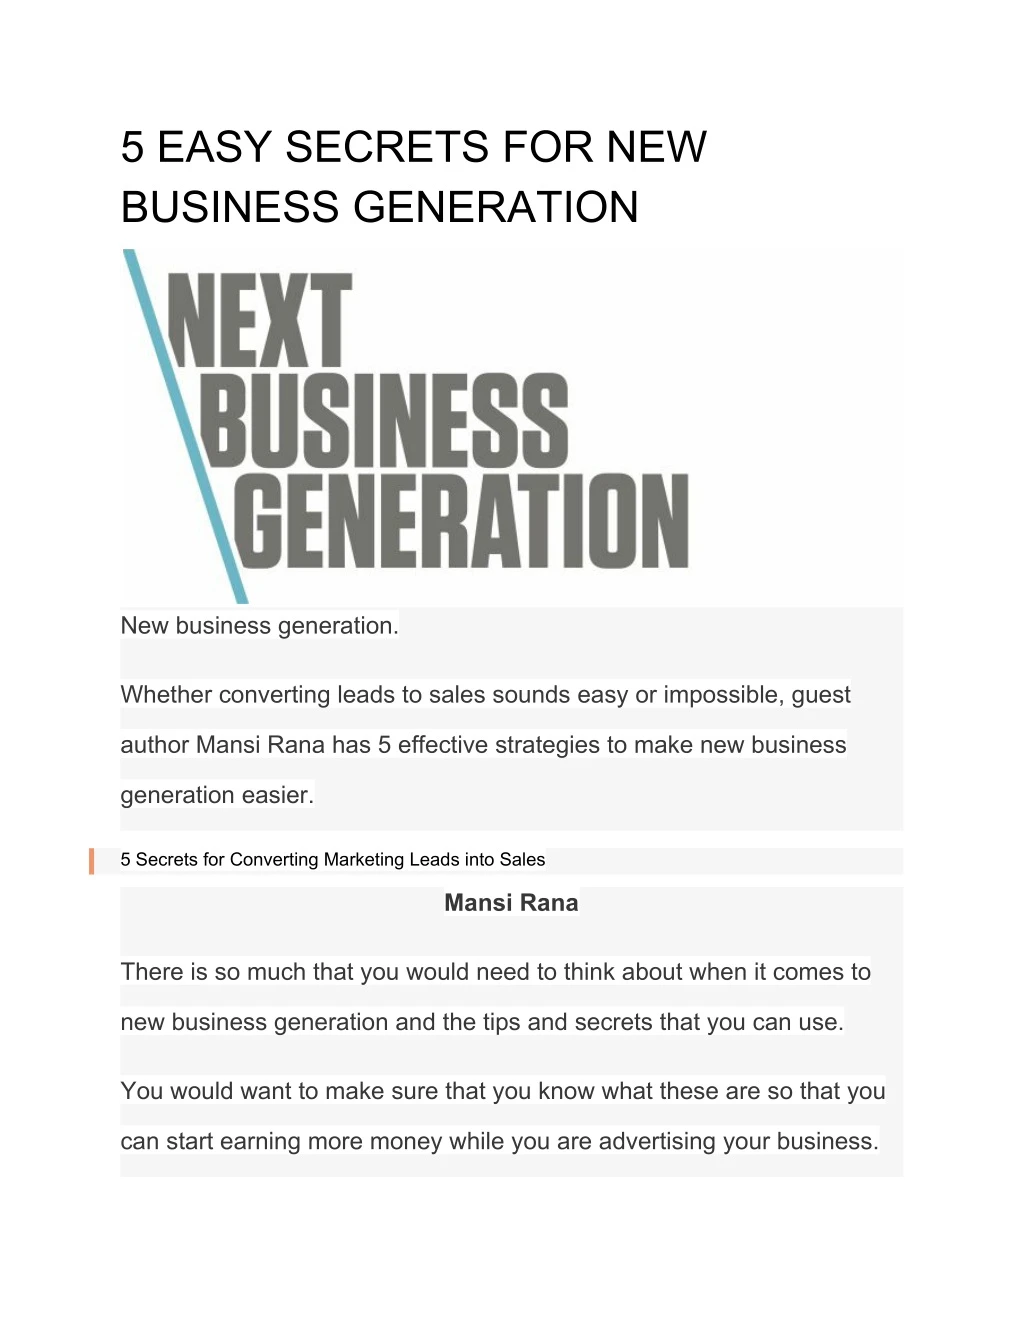 5 easy secrets for new business generation